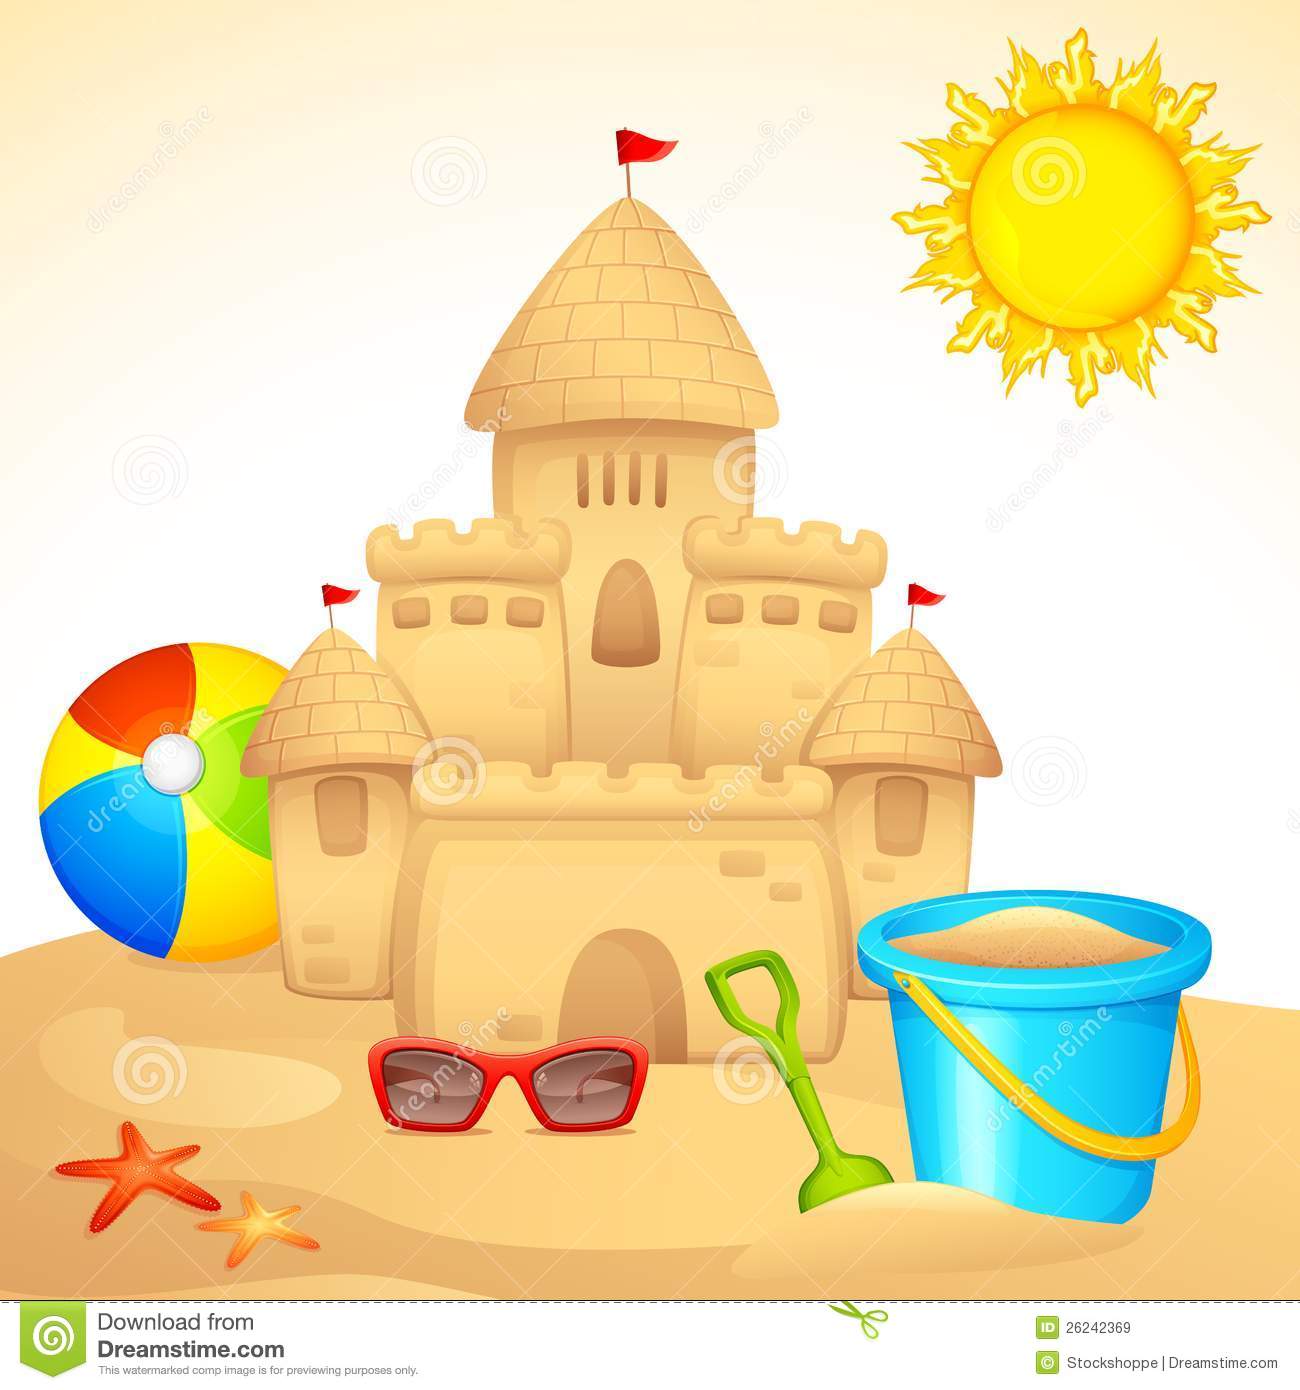 Sand Castle With Sandpit Kit Royalty Free Stock Images   Image